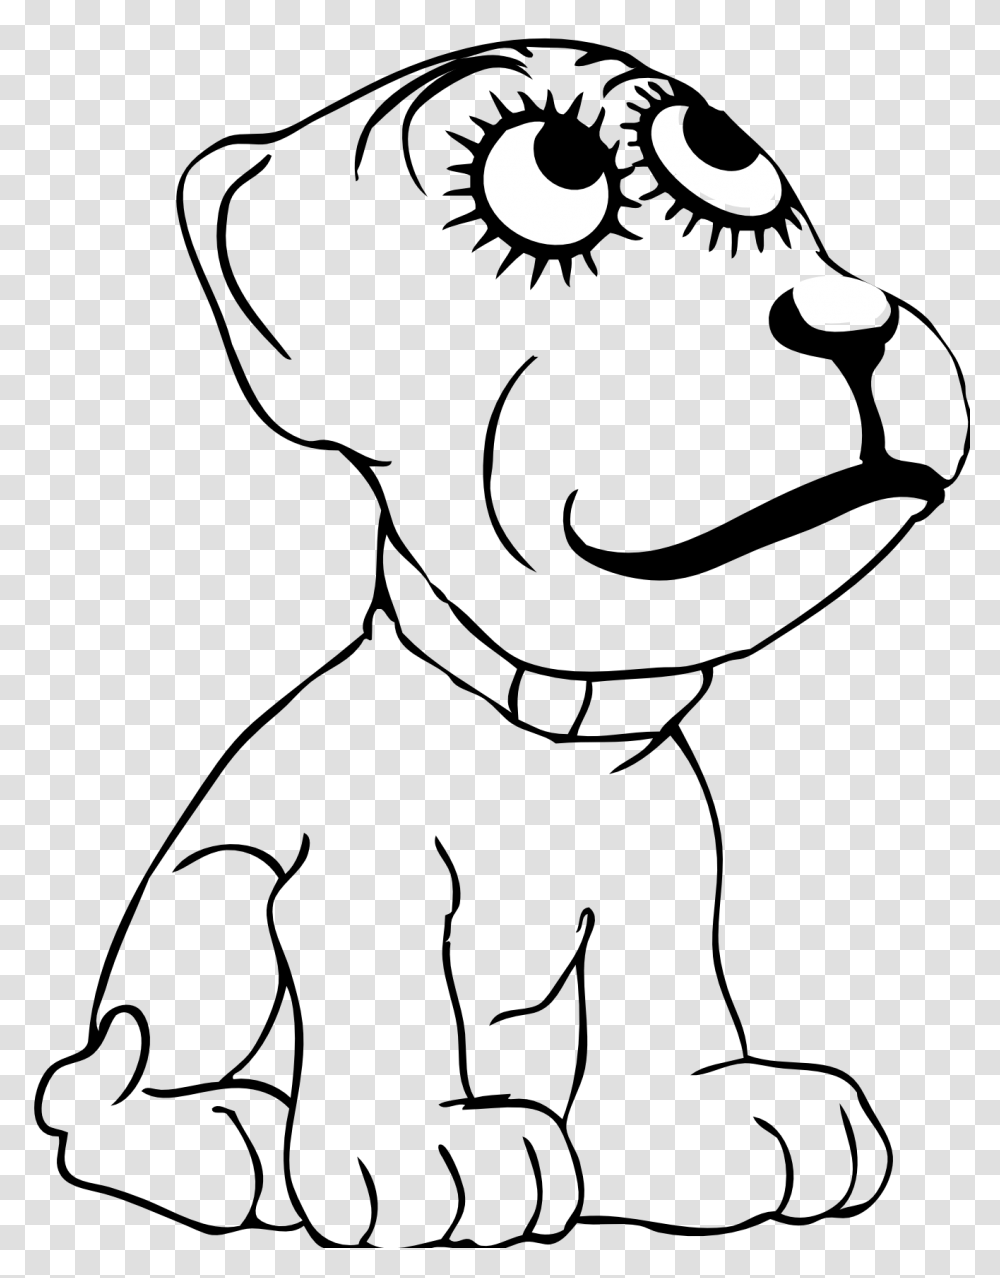 Black And White Dog Cartoon Gallery Images, Drawing, Stencil, Face, Photography Transparent Png